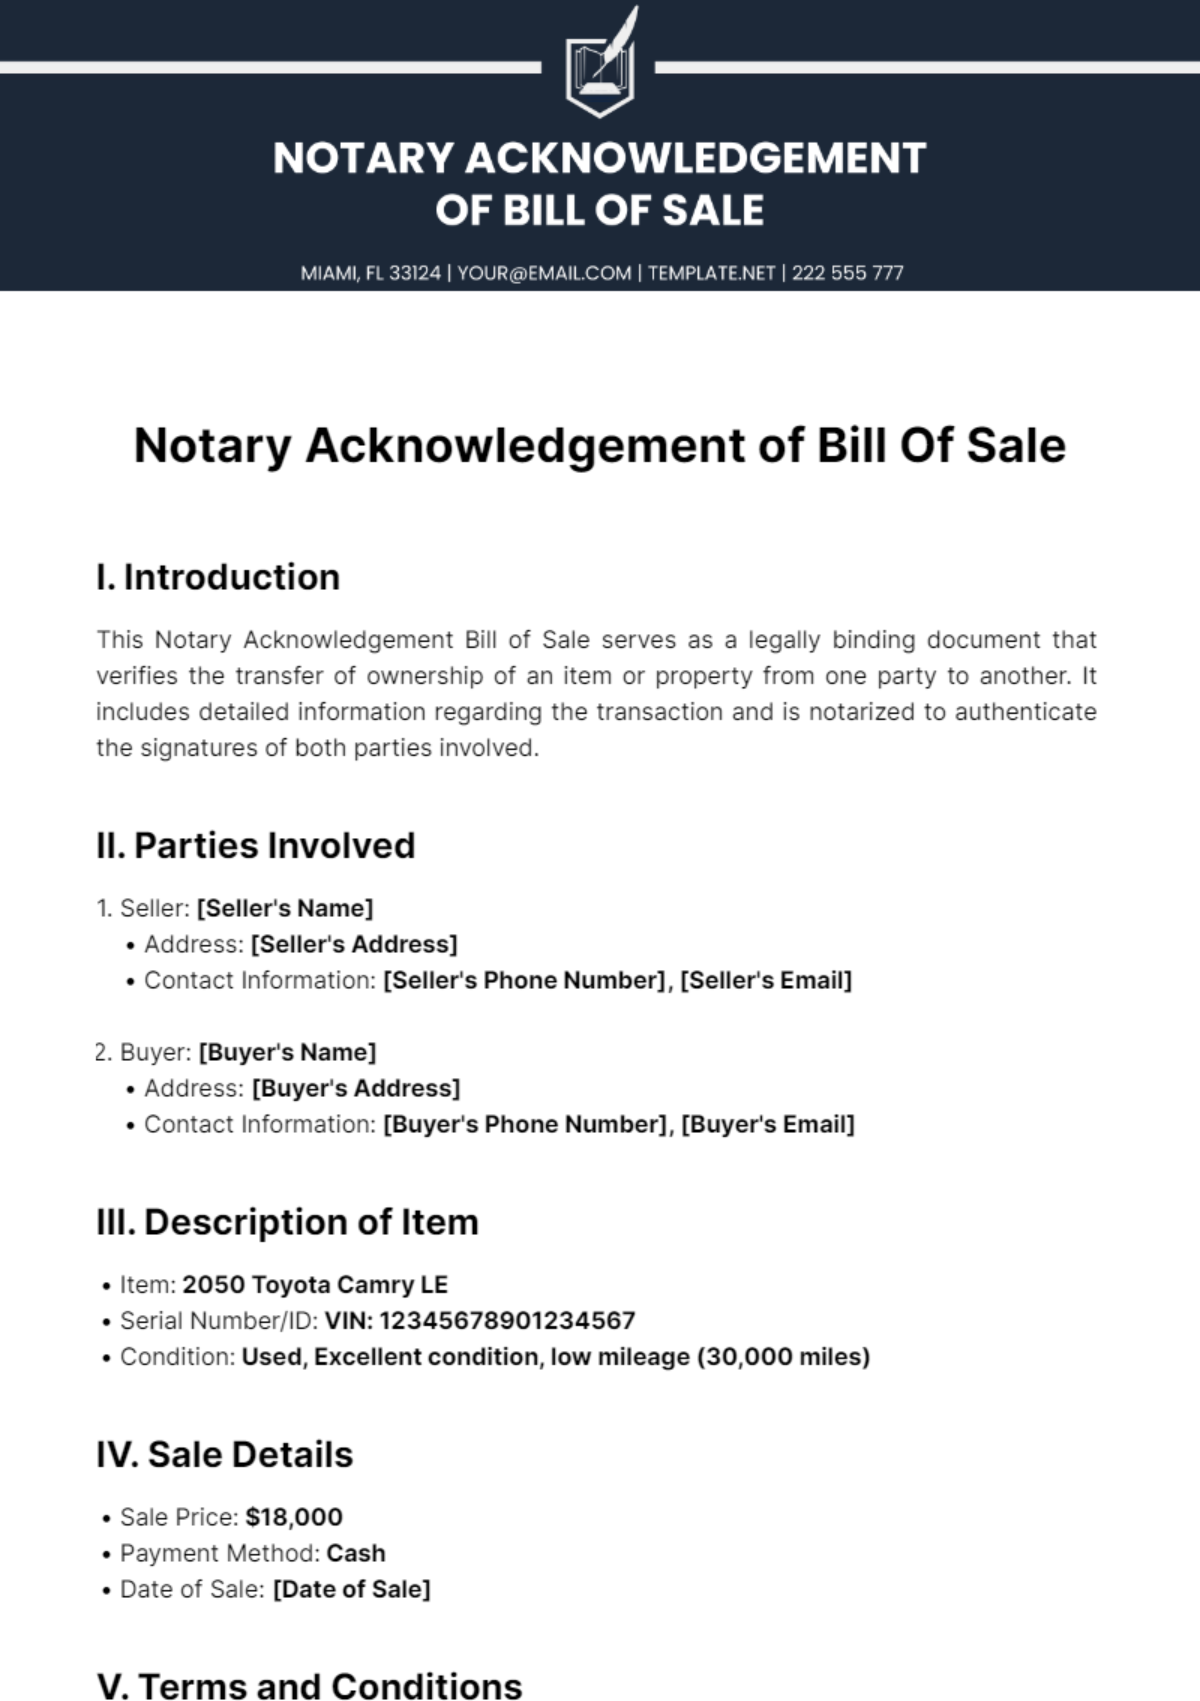 Free Notary Acknowledgement Bill Of Sale Template